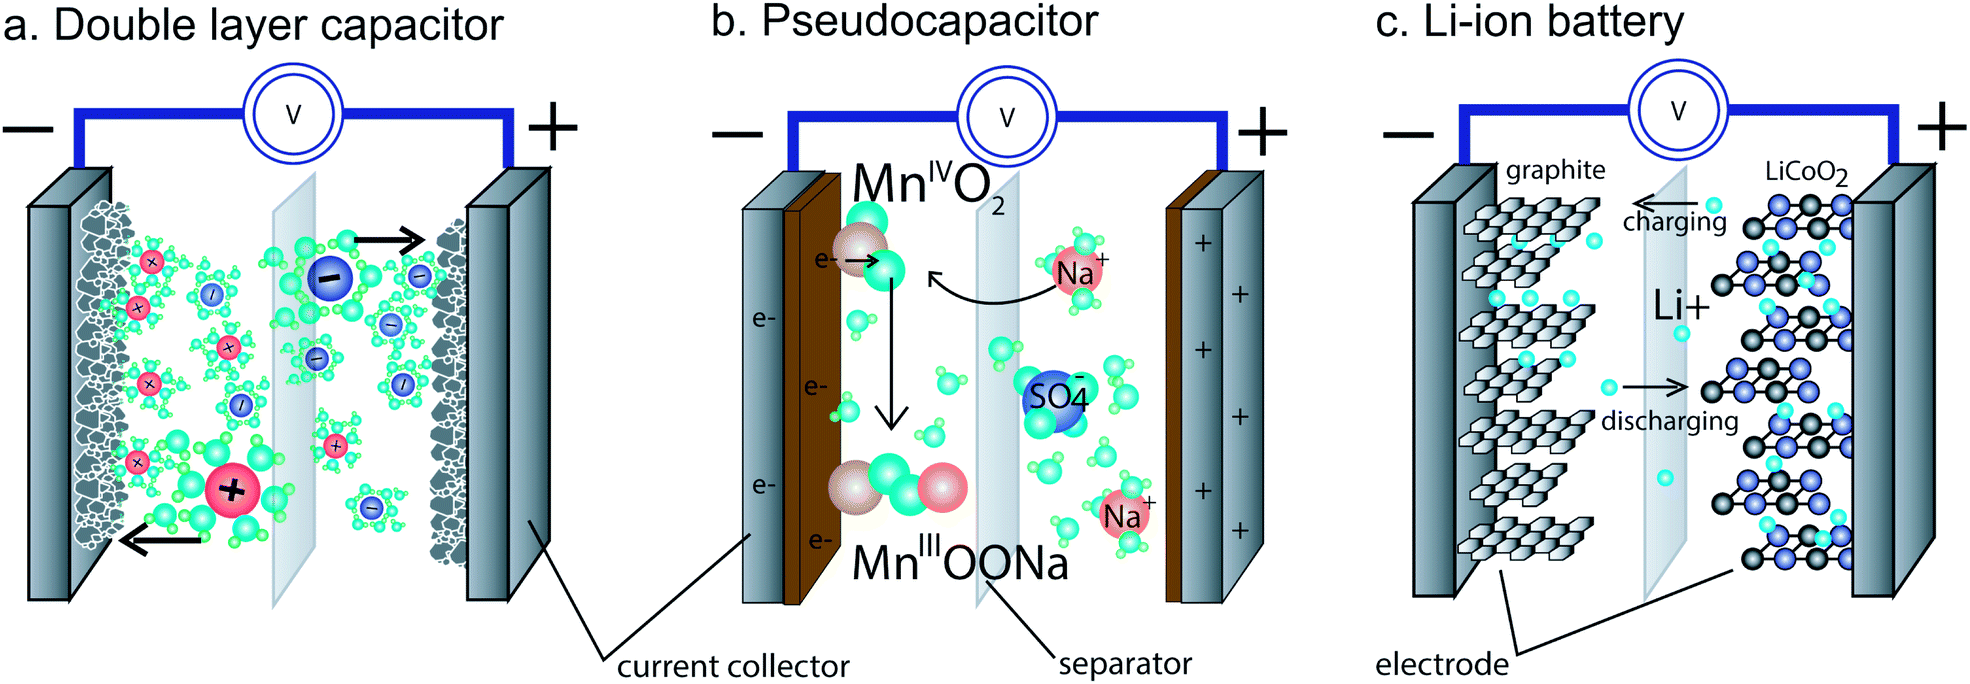 opinions on pseudocapacitor